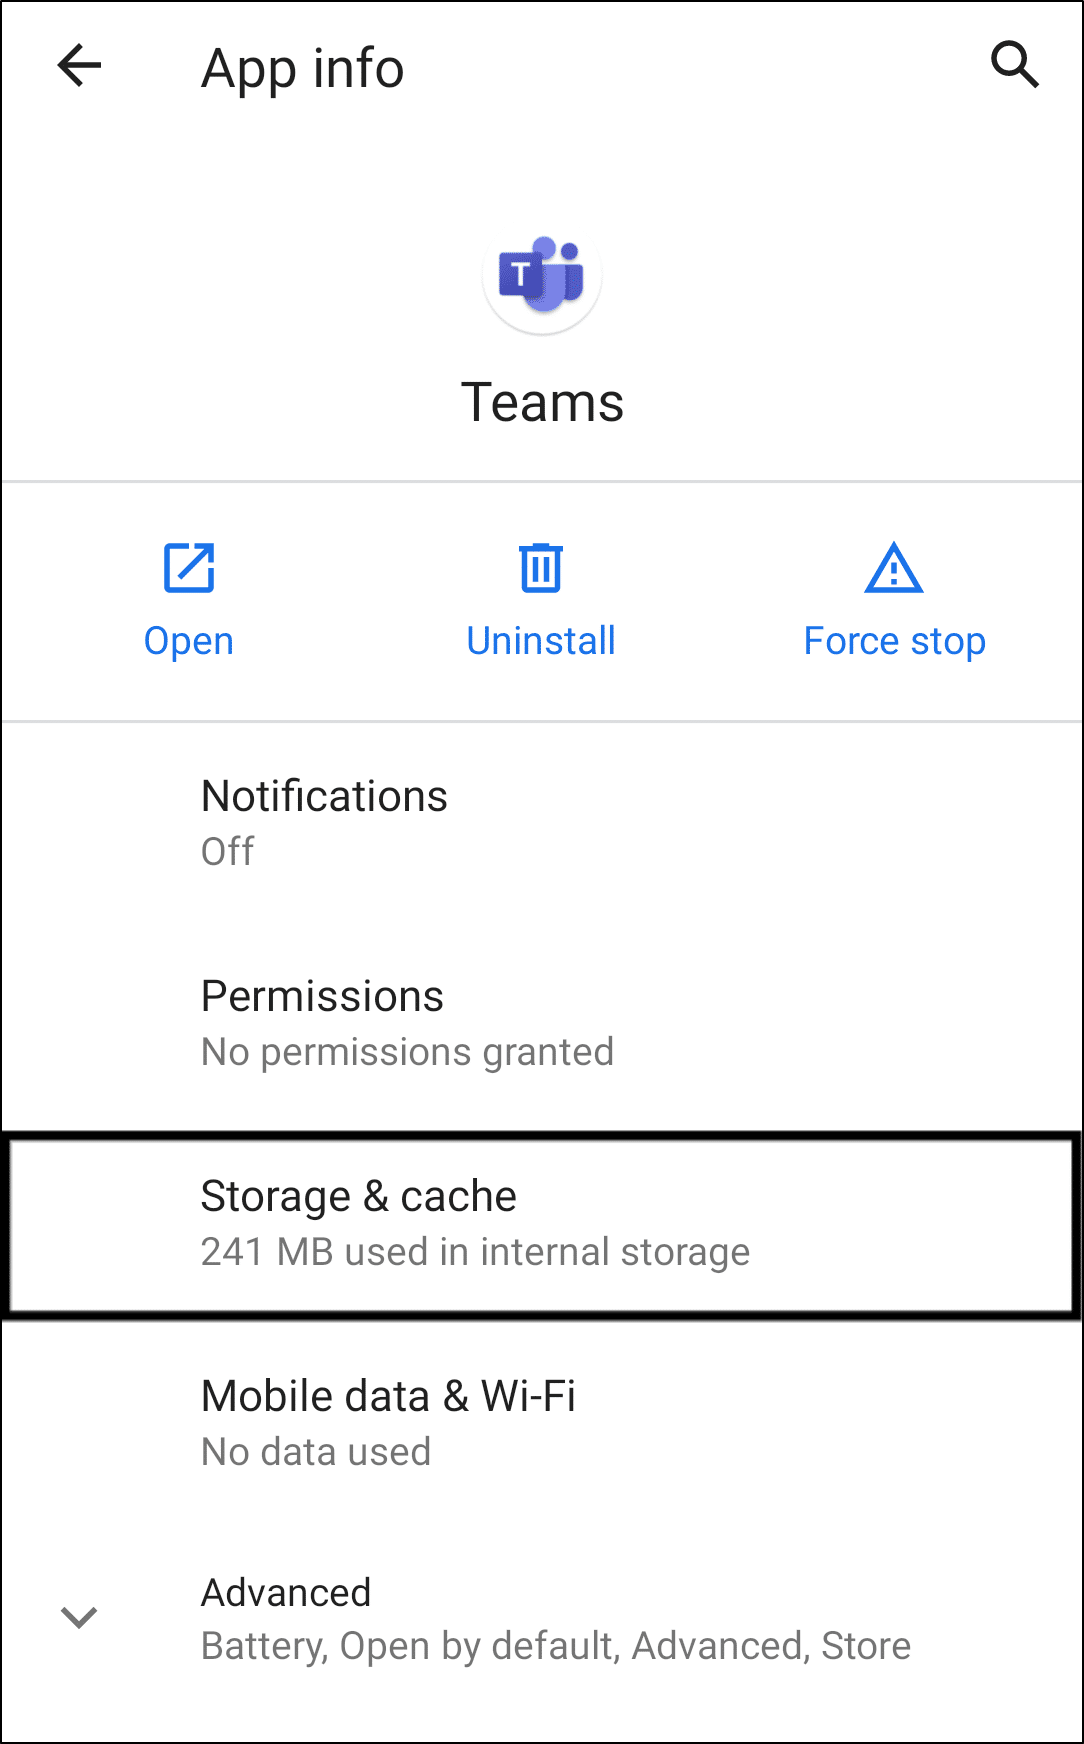 clear Microsoft Teams app cache and data on Android to fix Microsoft Teams screen share black/blank screen or not working